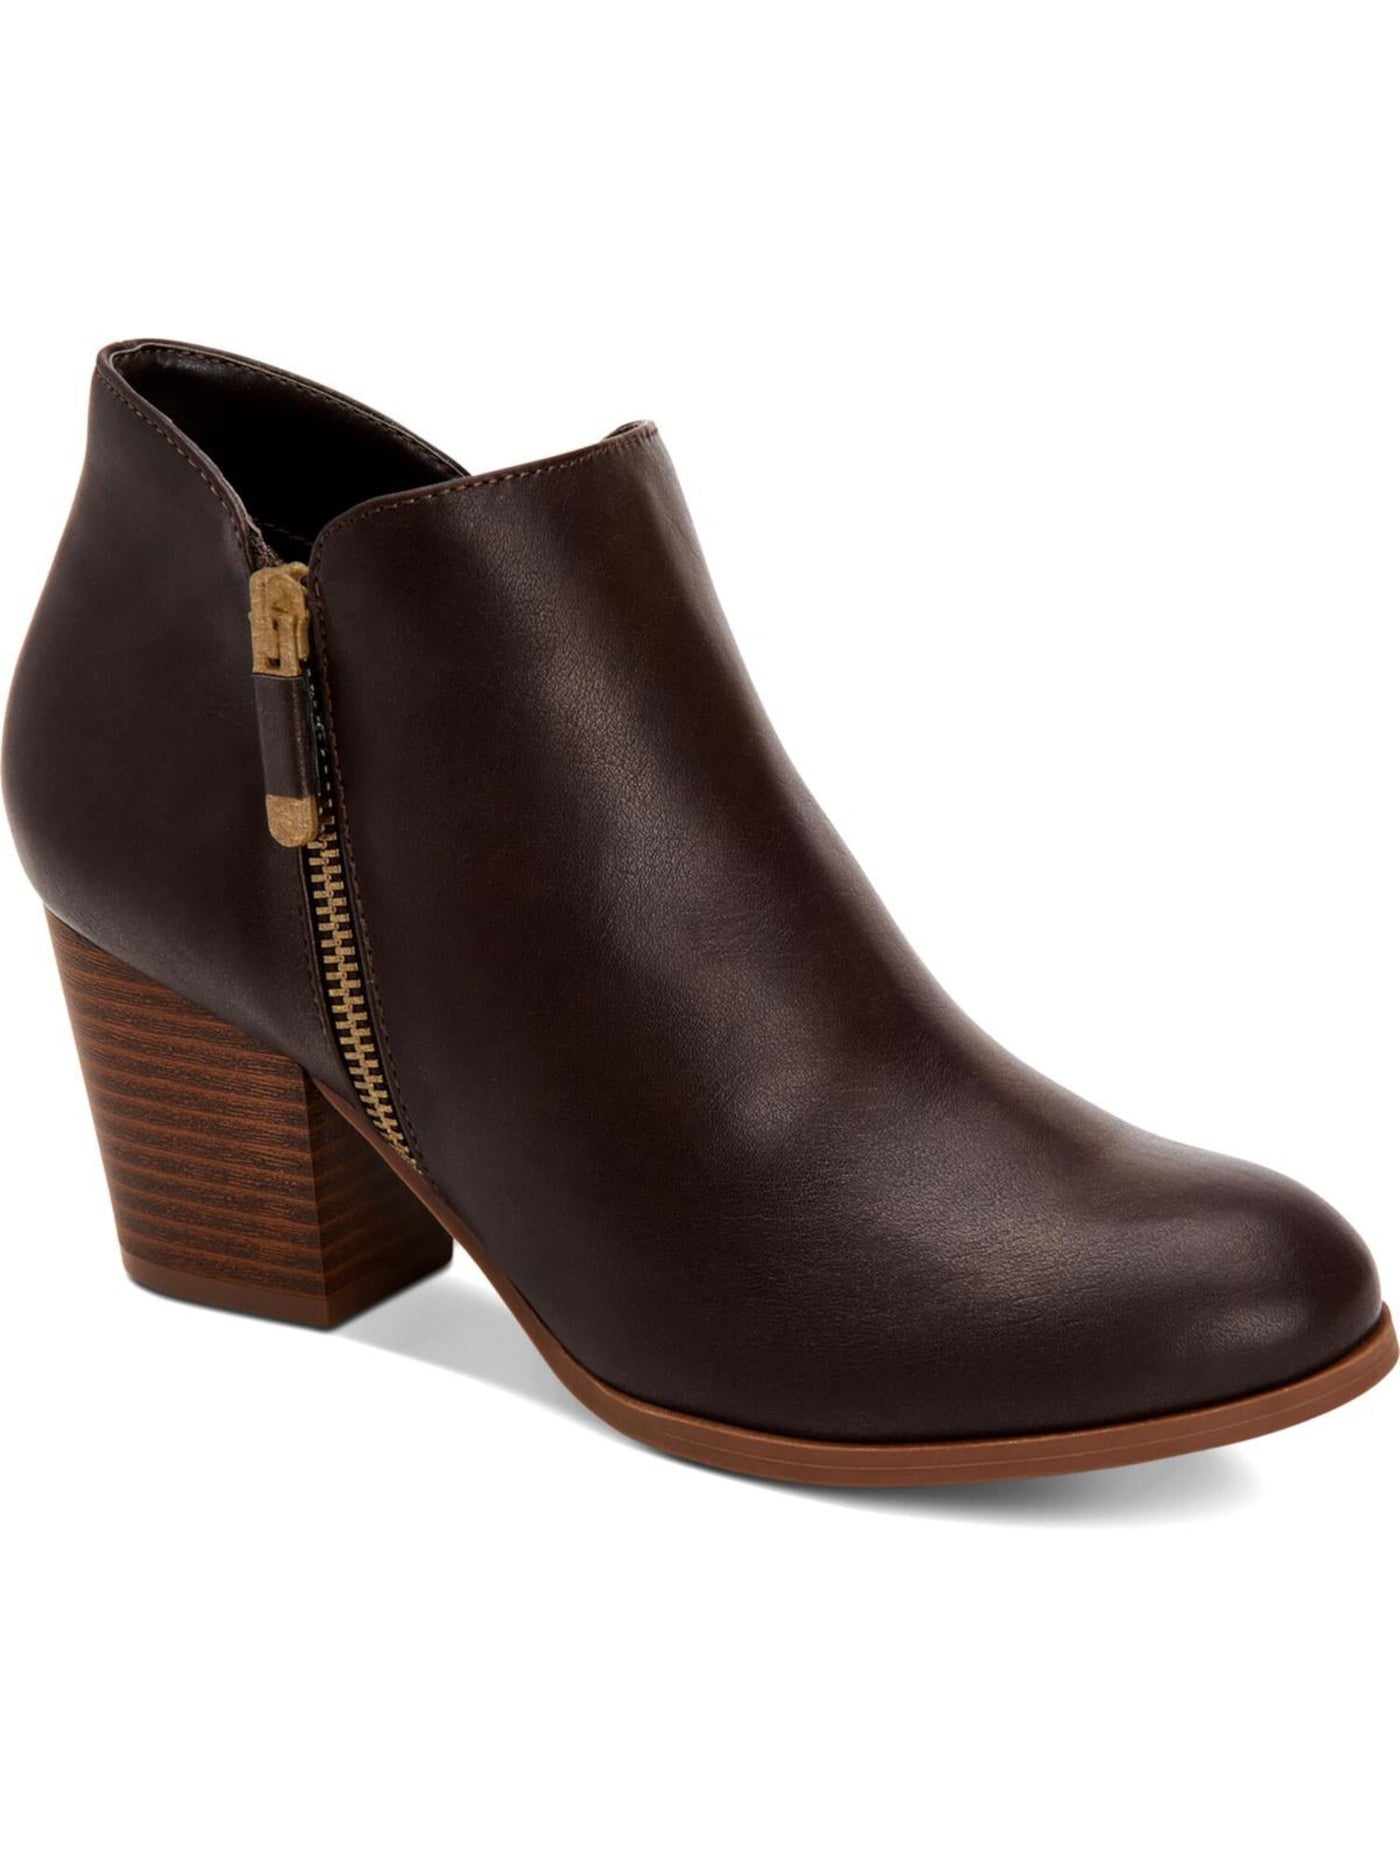 STYLE & COMPANY Womens Brown Notched At Sides Zipper Accent Masrinaa Almond Toe Block Heel Zip-Up Booties 8 M